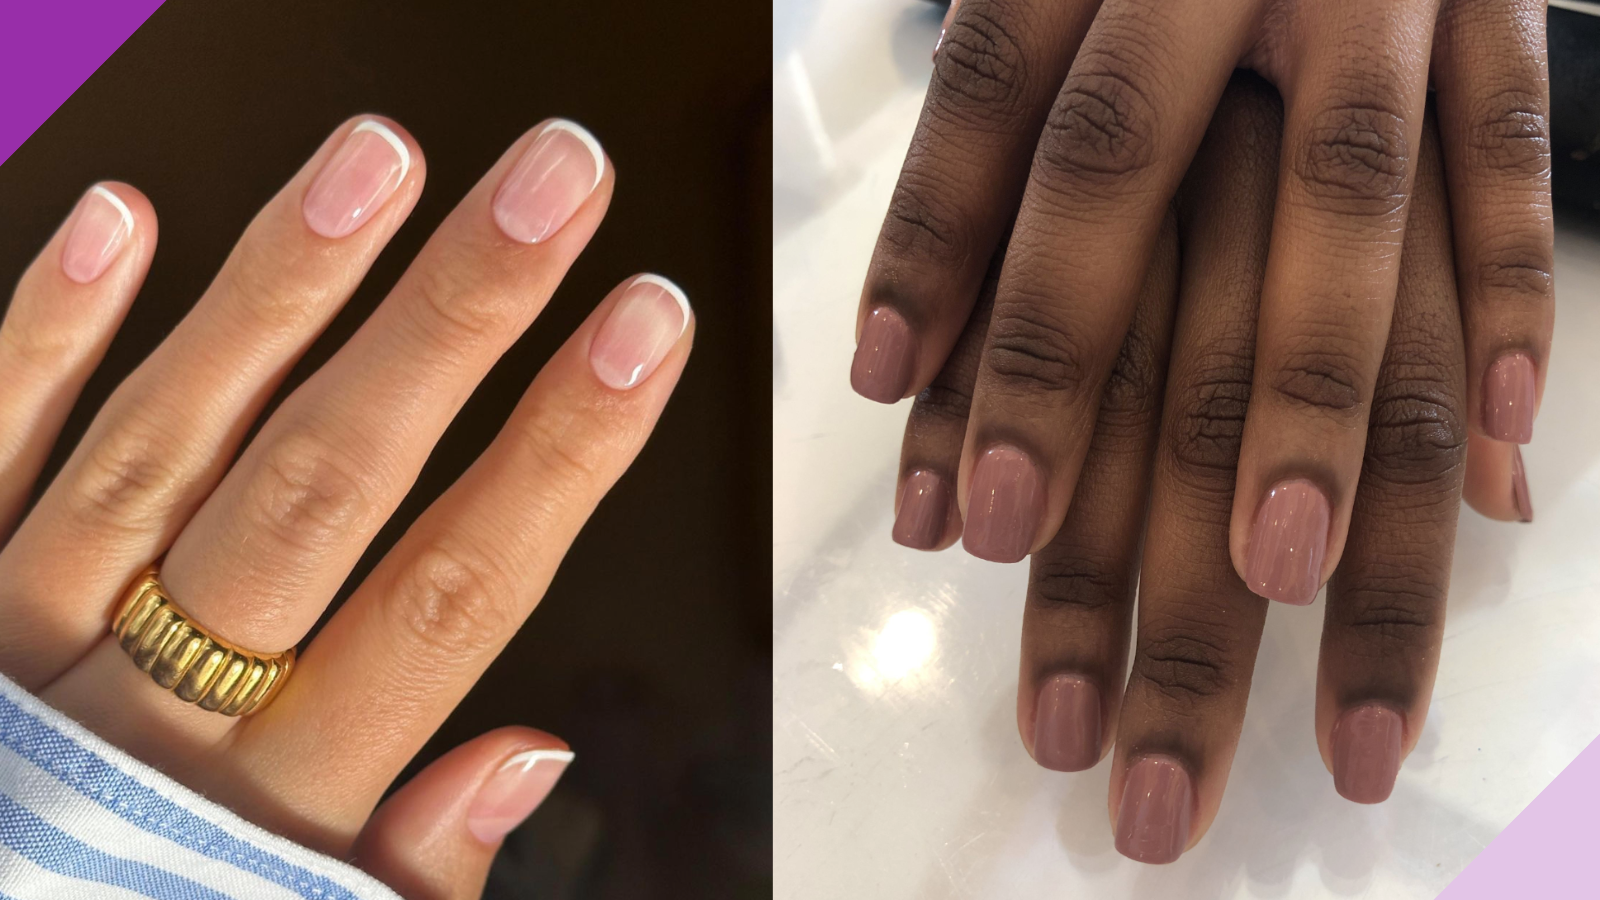 Indigo Nails Distributor Sara - How to break boredom? 💅 A subtle,  geometric decoration will transform your stylization into an original,  abstract work of art ✨🎨 Products used: gel brush Ivory shade,